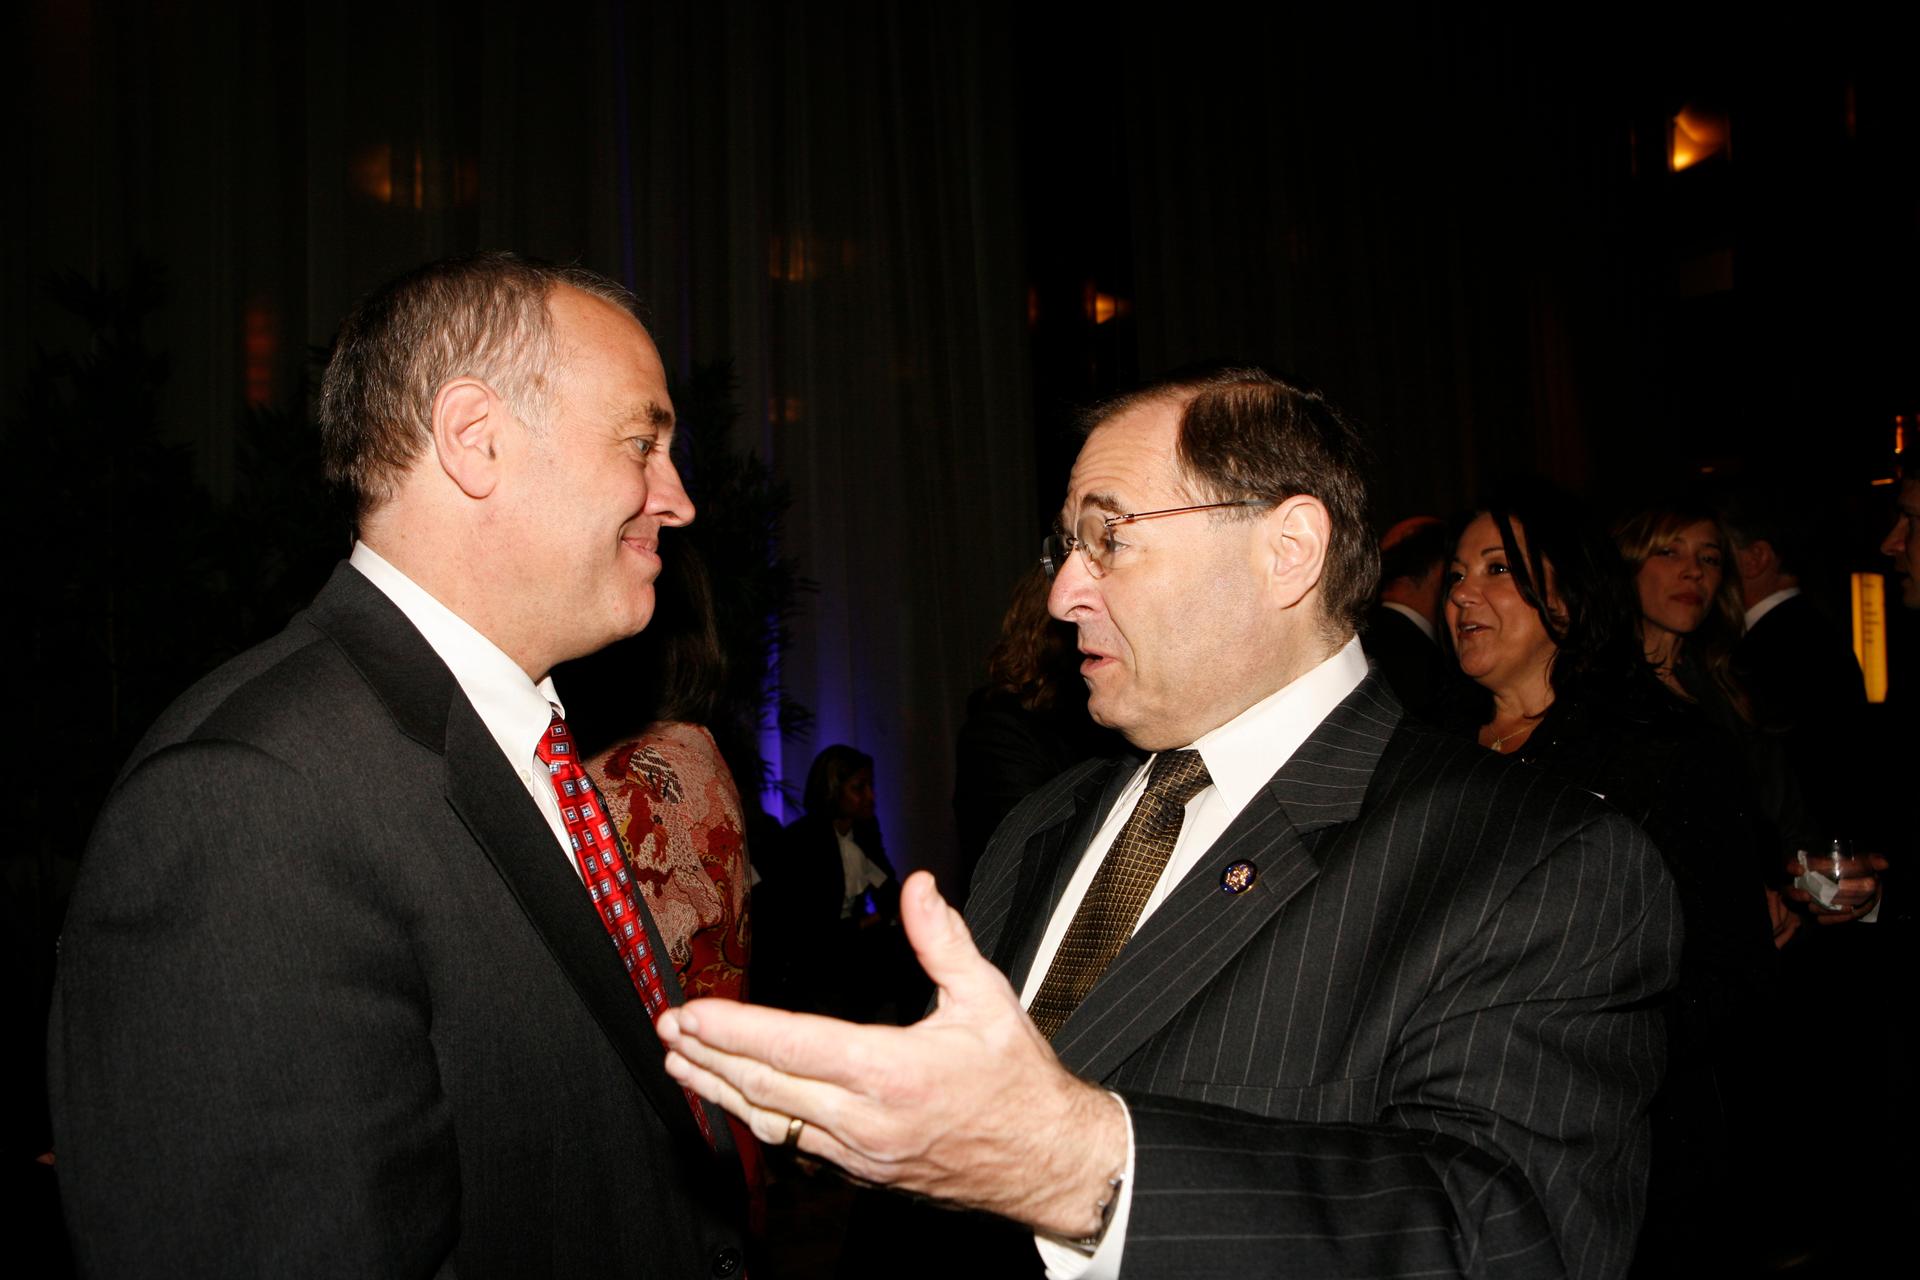 DiNapoli and Nadler